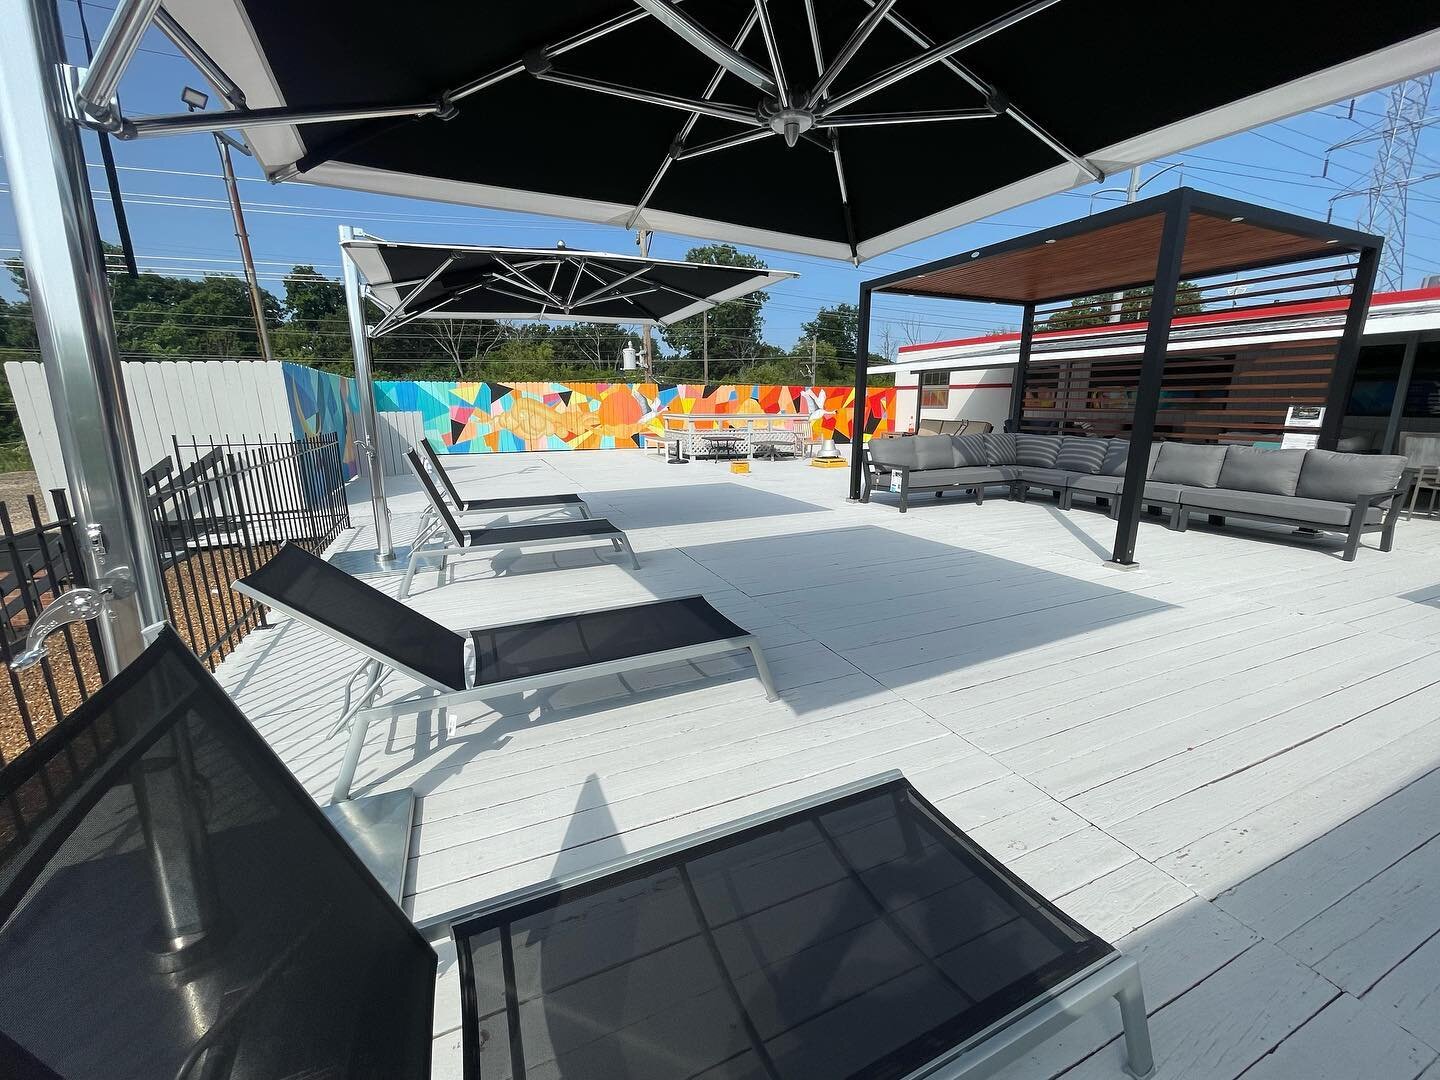 Come check out our reimagined deck. Complete with Tuuci cabana, Tuuci cantilevers and mural done by local Chicago artist Luis munoz!